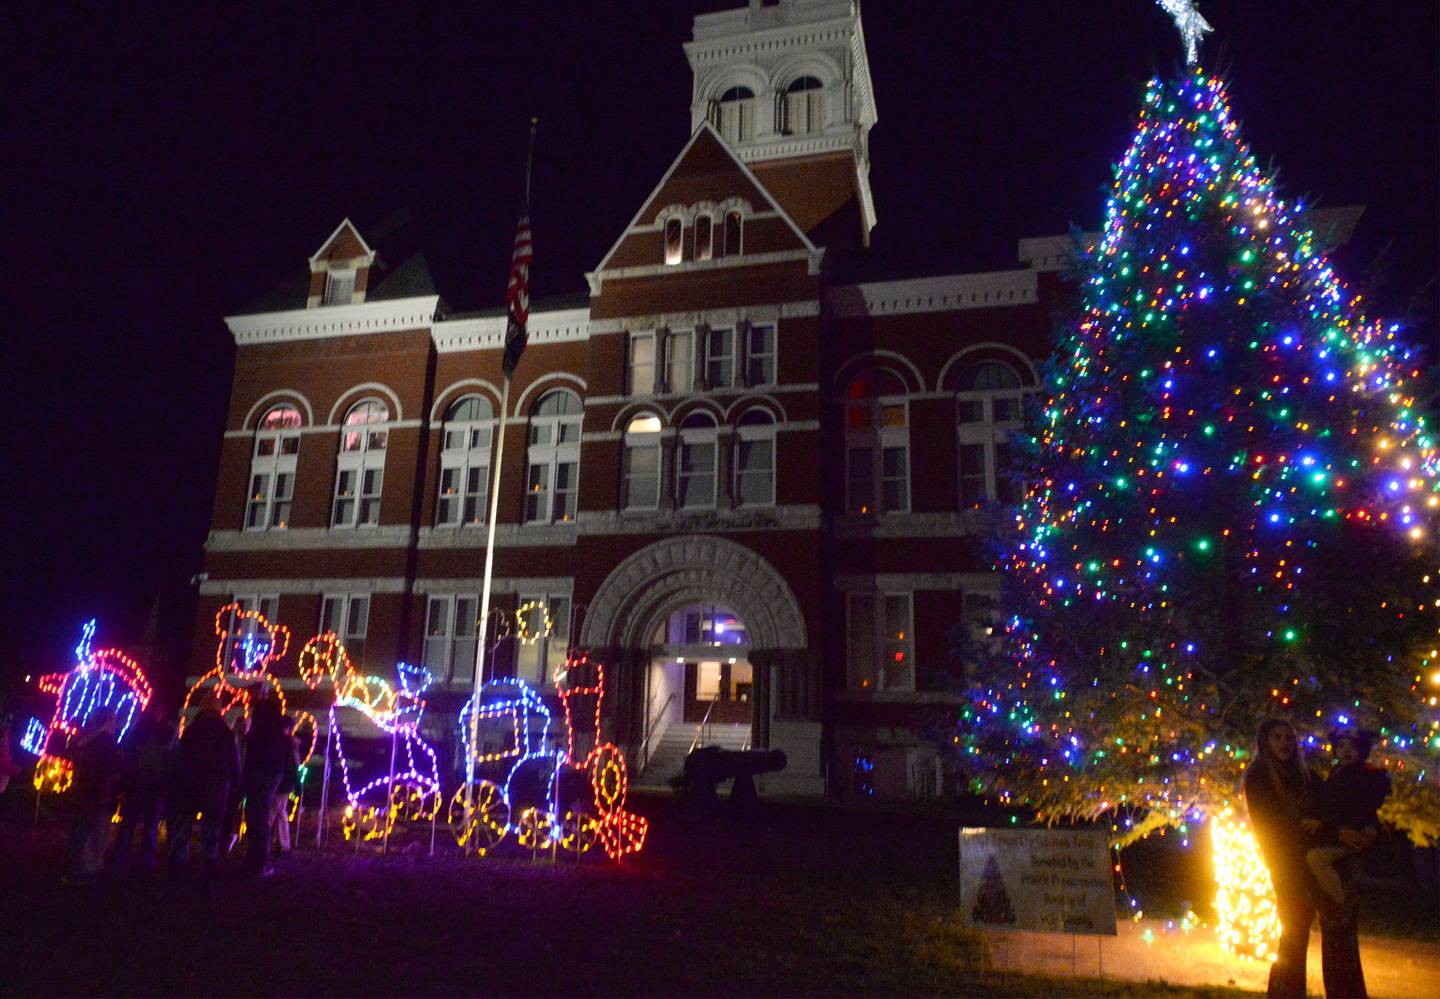 The official lighting of Oregon's Christmas tree was part of the evening festivities at Oregon's Candlelight Walk on Saturday, Nov. 25, 2023.. The event also included Christmas music, shopping specials, kids activities, horsedrawn wagon rides and visits with Santa.